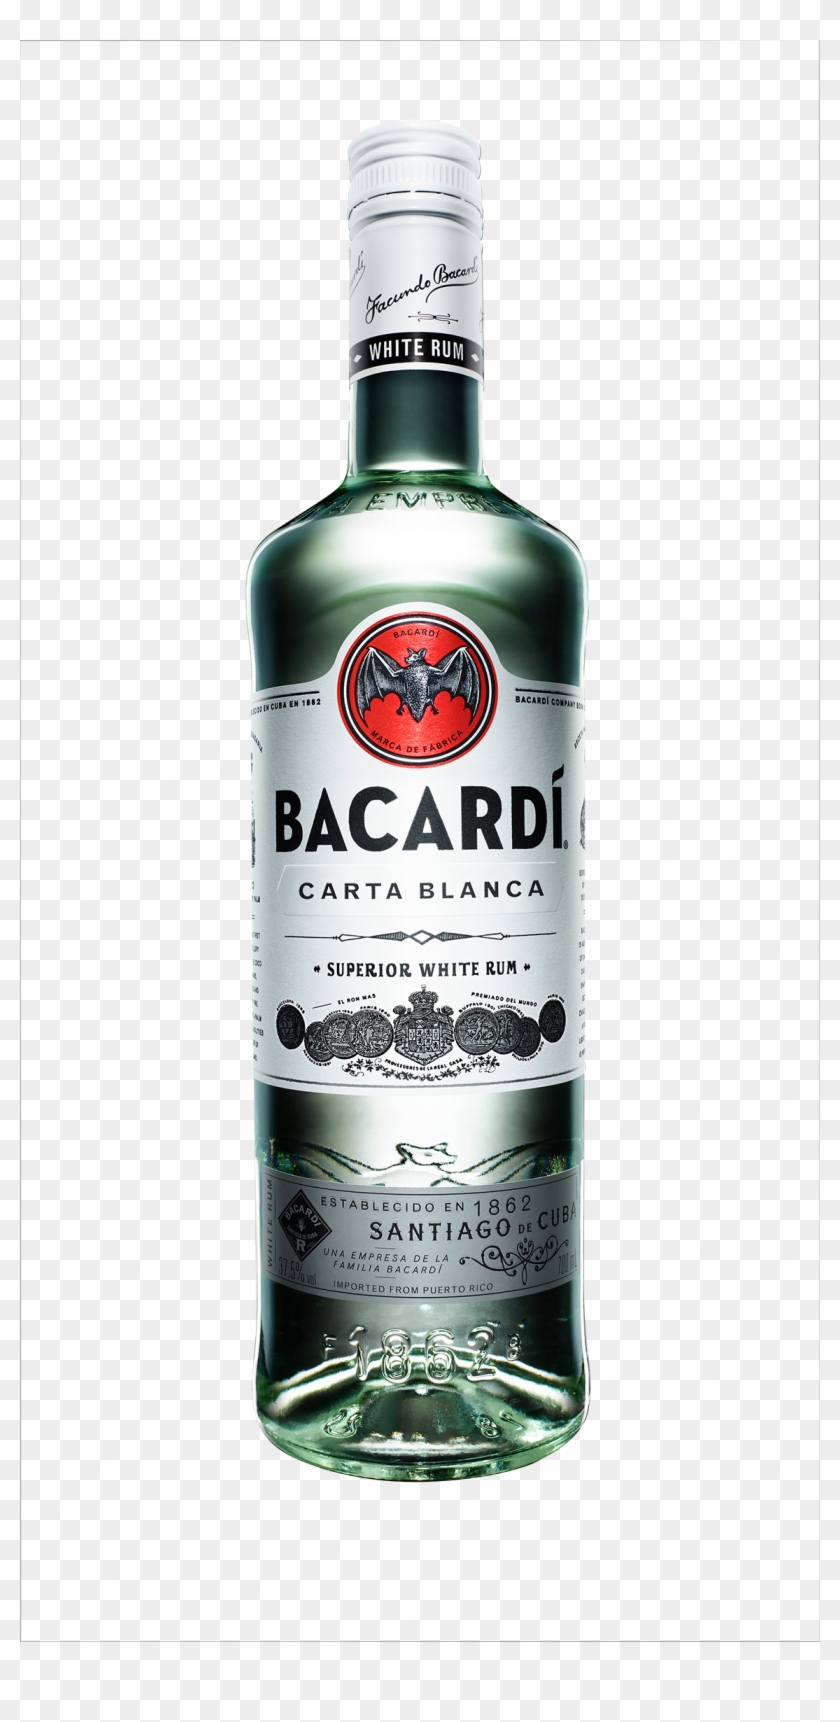 Picture Free Stock Png Transparent Images Pluspng Pngpluspngcom - Bacardi Bottle Png Clipart #373215